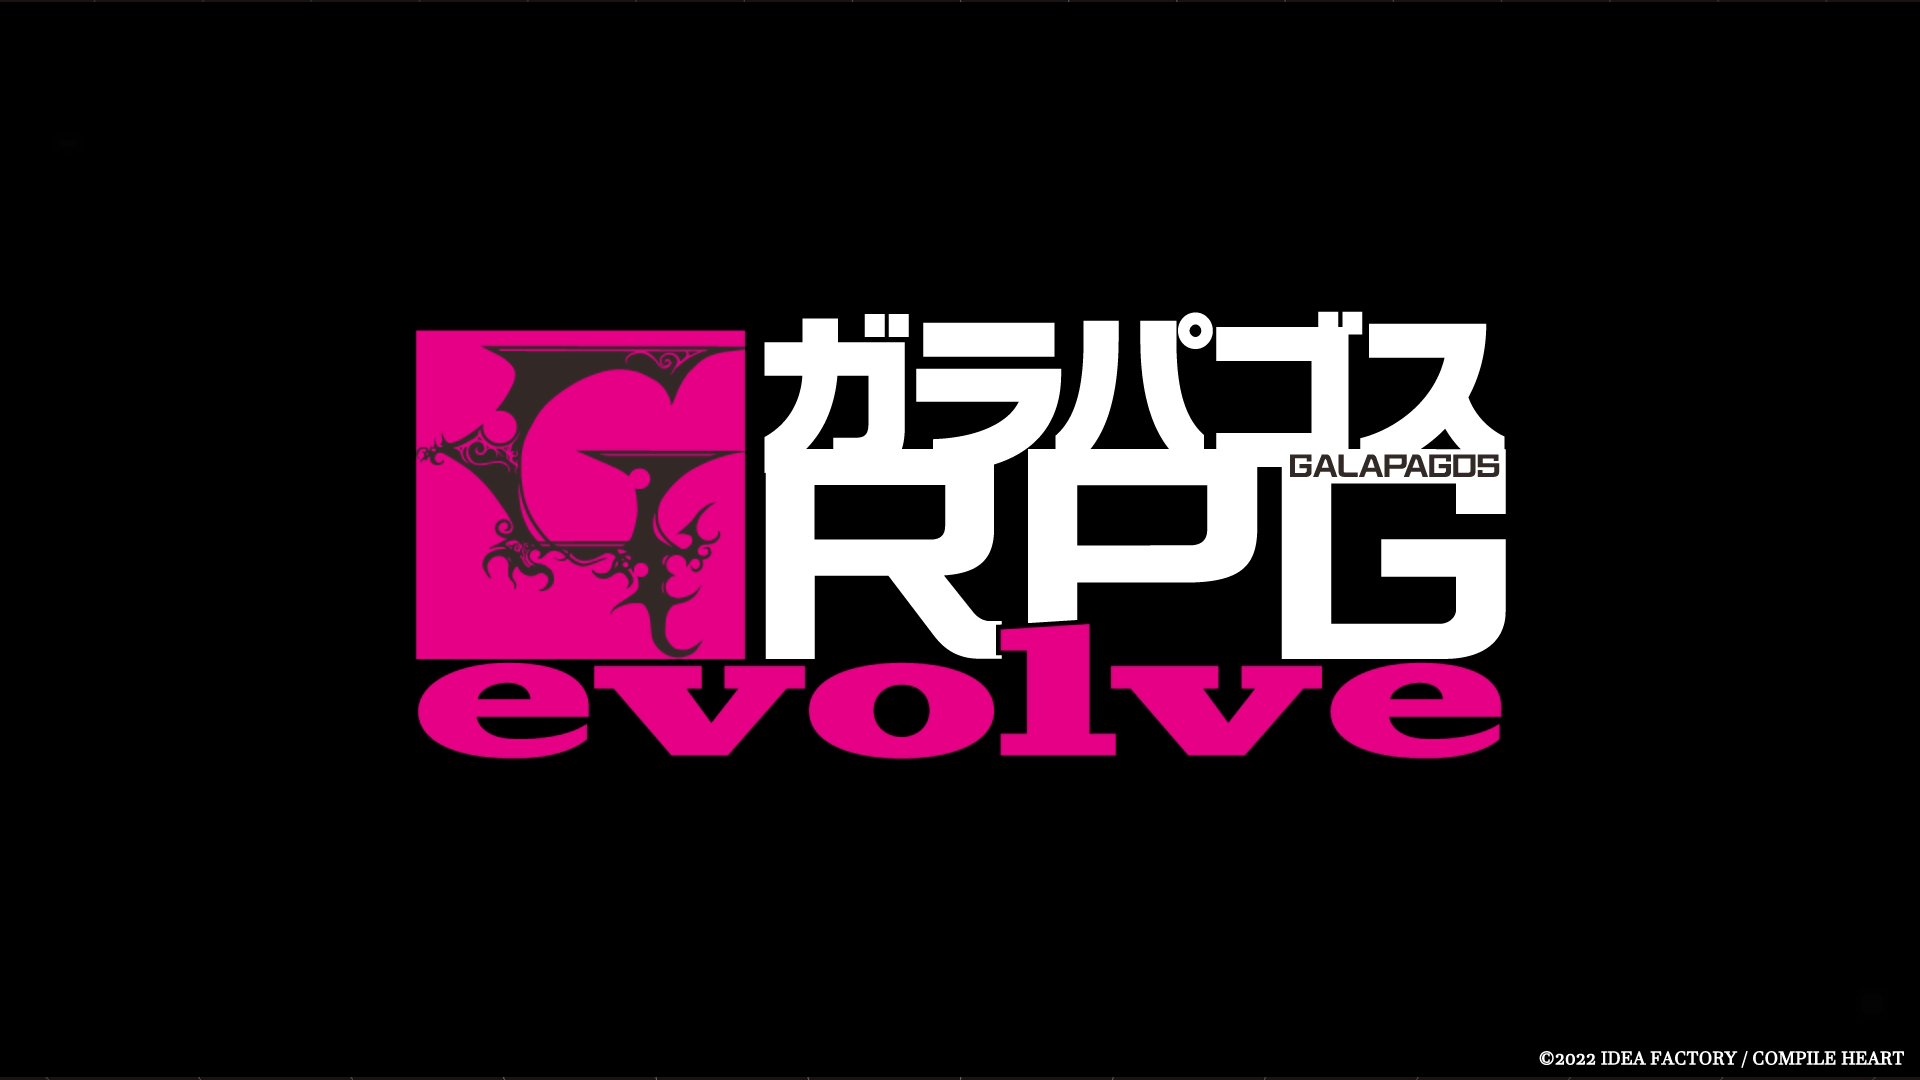 #
      Compile Heart launches ‘Galapagos RPG evolve’ new title teaser website